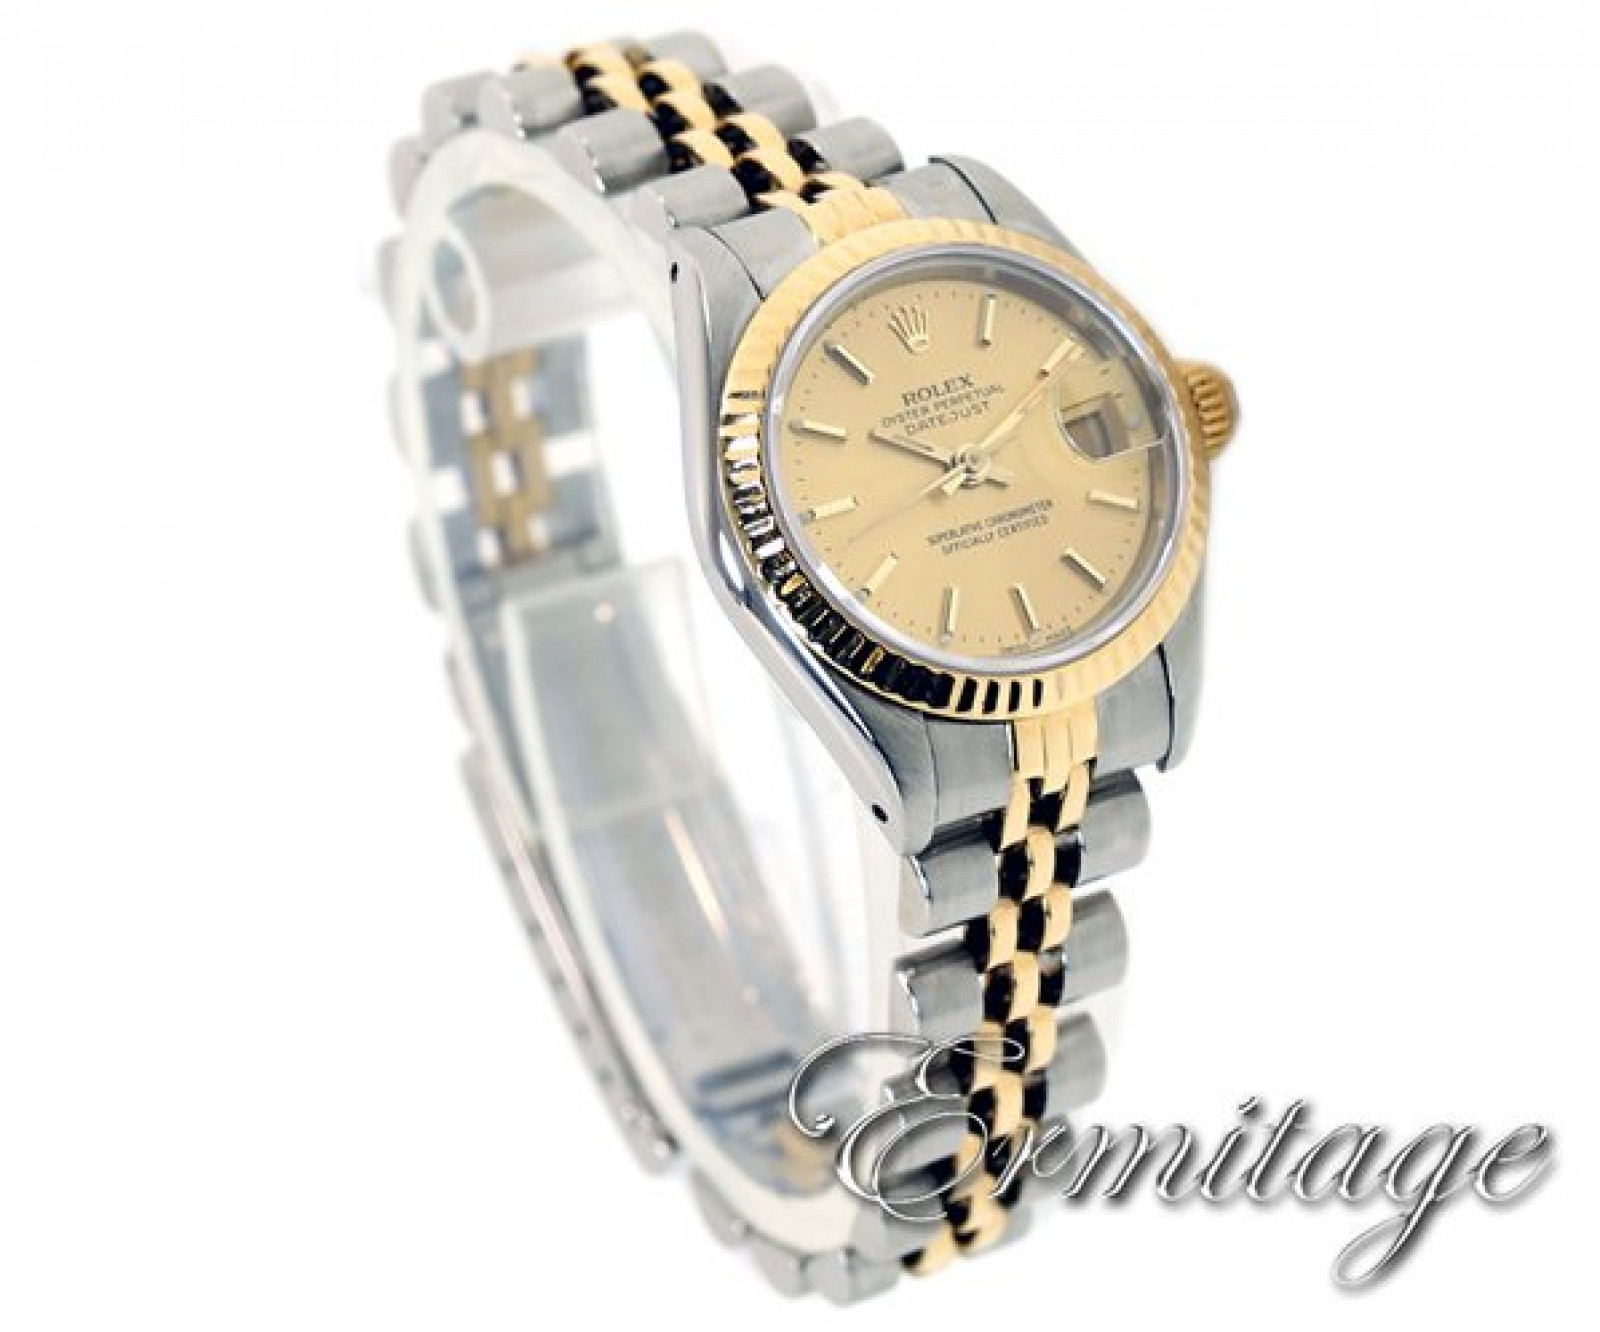 Pre-Owned Gold & Steel Rolex Datejust 69173 Year 1983